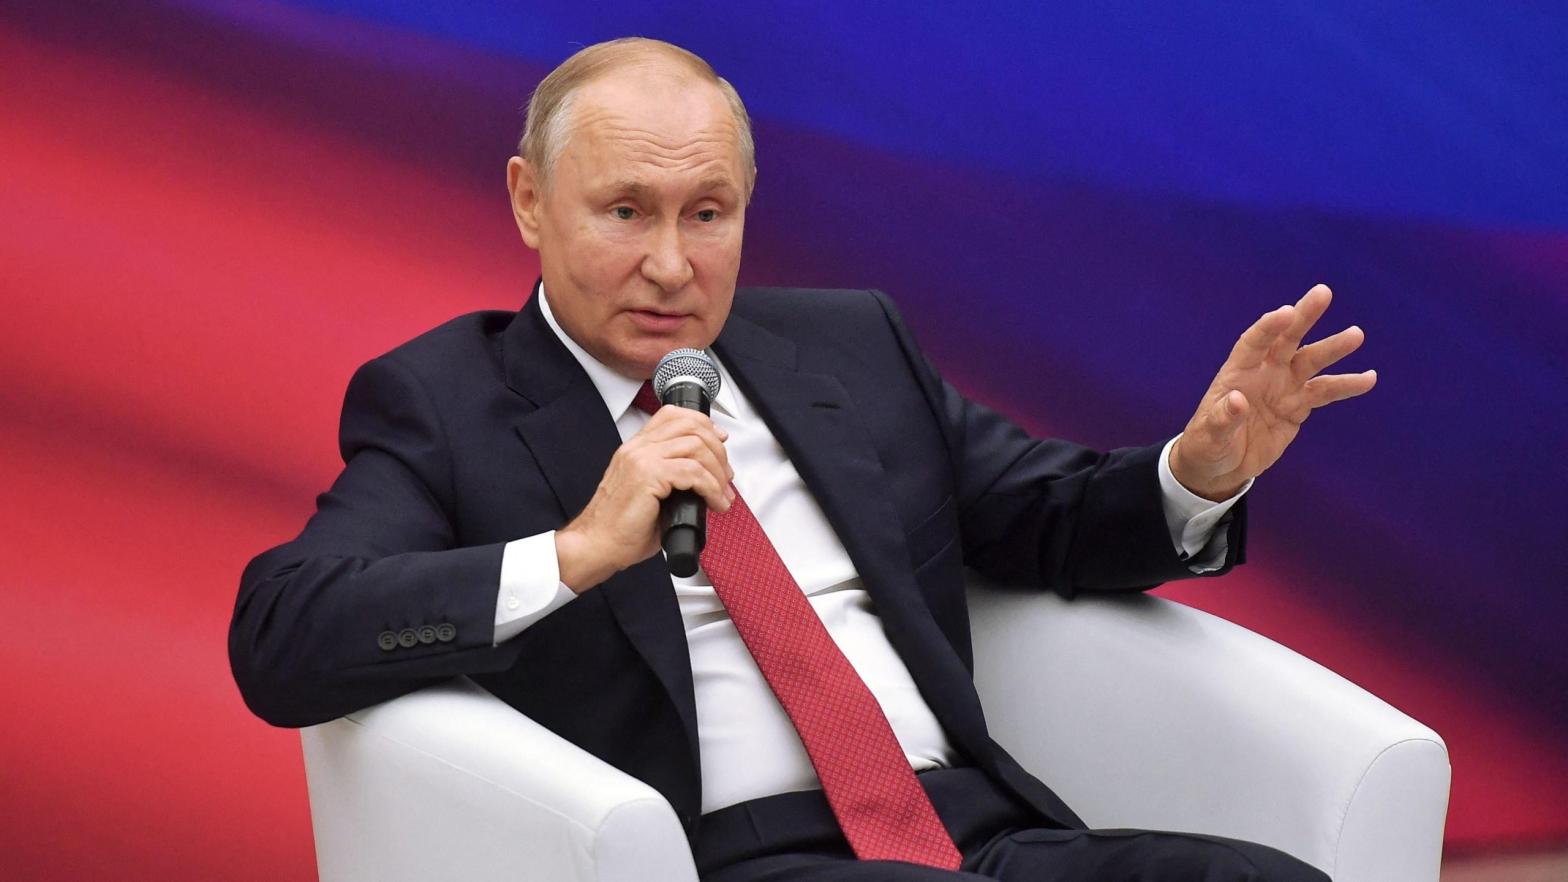 Russia's President Vladimir Putin speaks during a United Russia ruling party's members meeting in Moscow on August 22, 2021. (Photo: Mikhail Voskresenskiy/Sputnik/AFP, Getty Images)